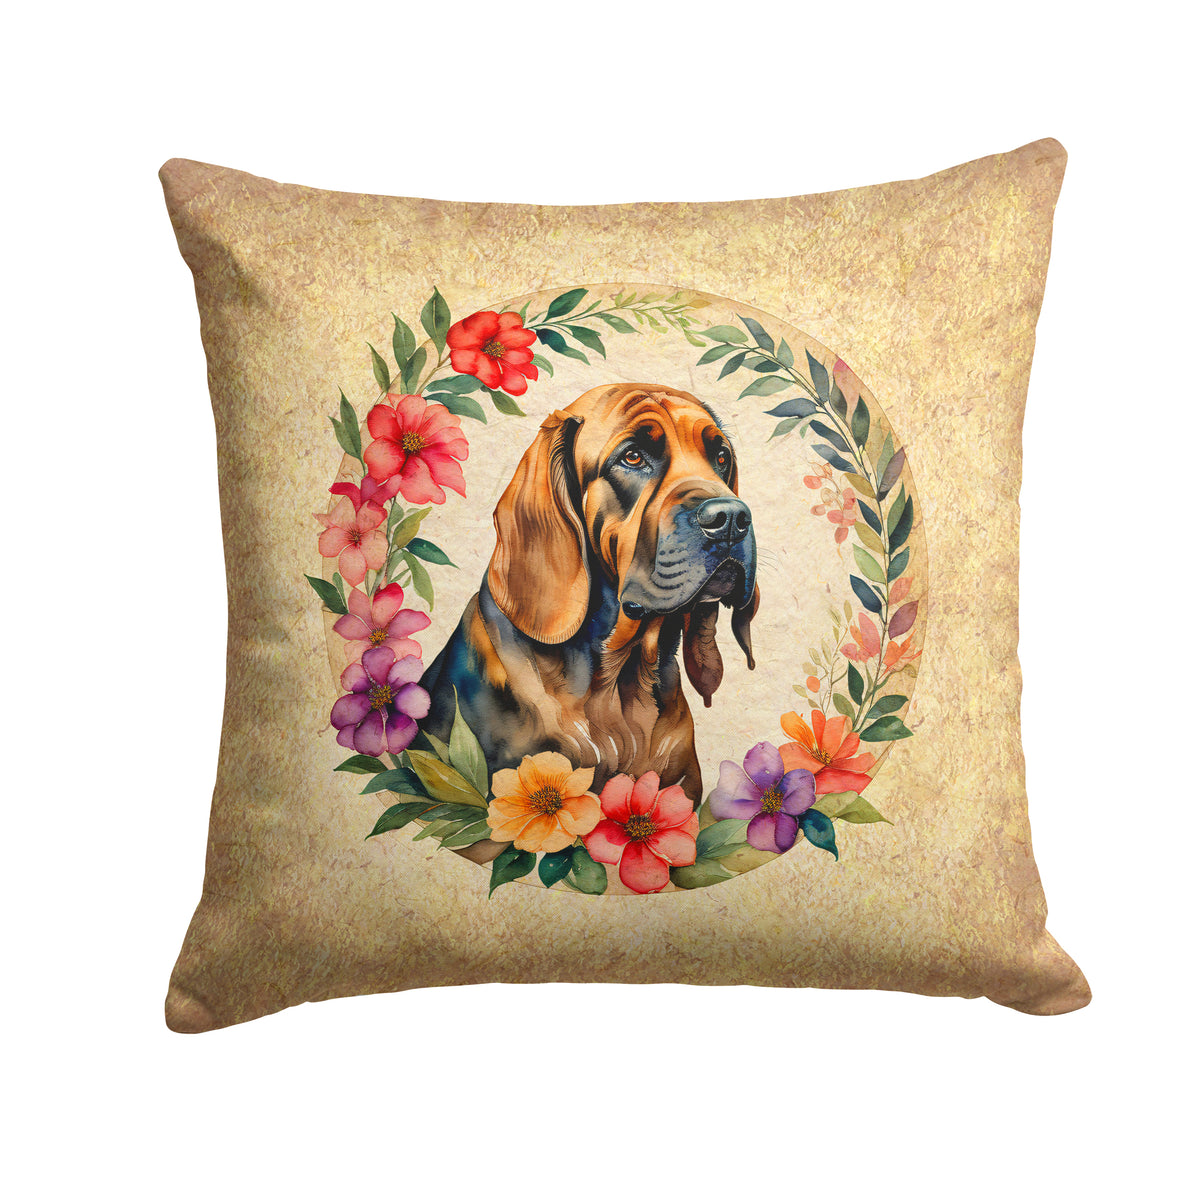 Buy this Bloodhound and Flowers Fabric Decorative Pillow